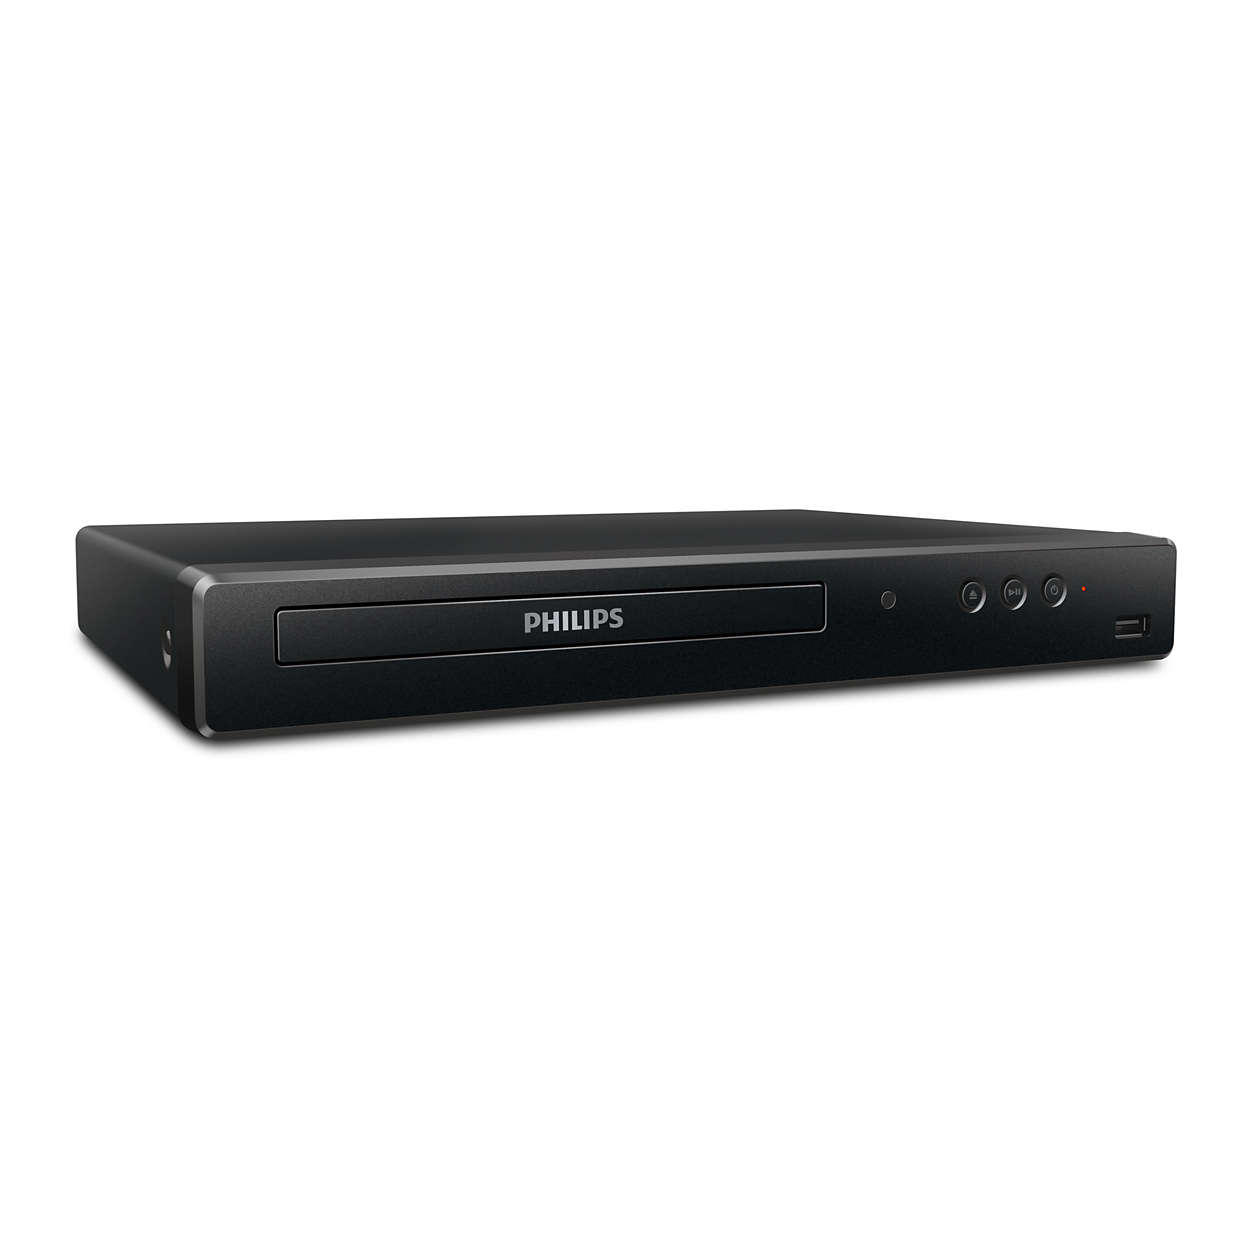 Melodieus helling Land Blu-ray and DVD player BDP1502/F7 | Philips